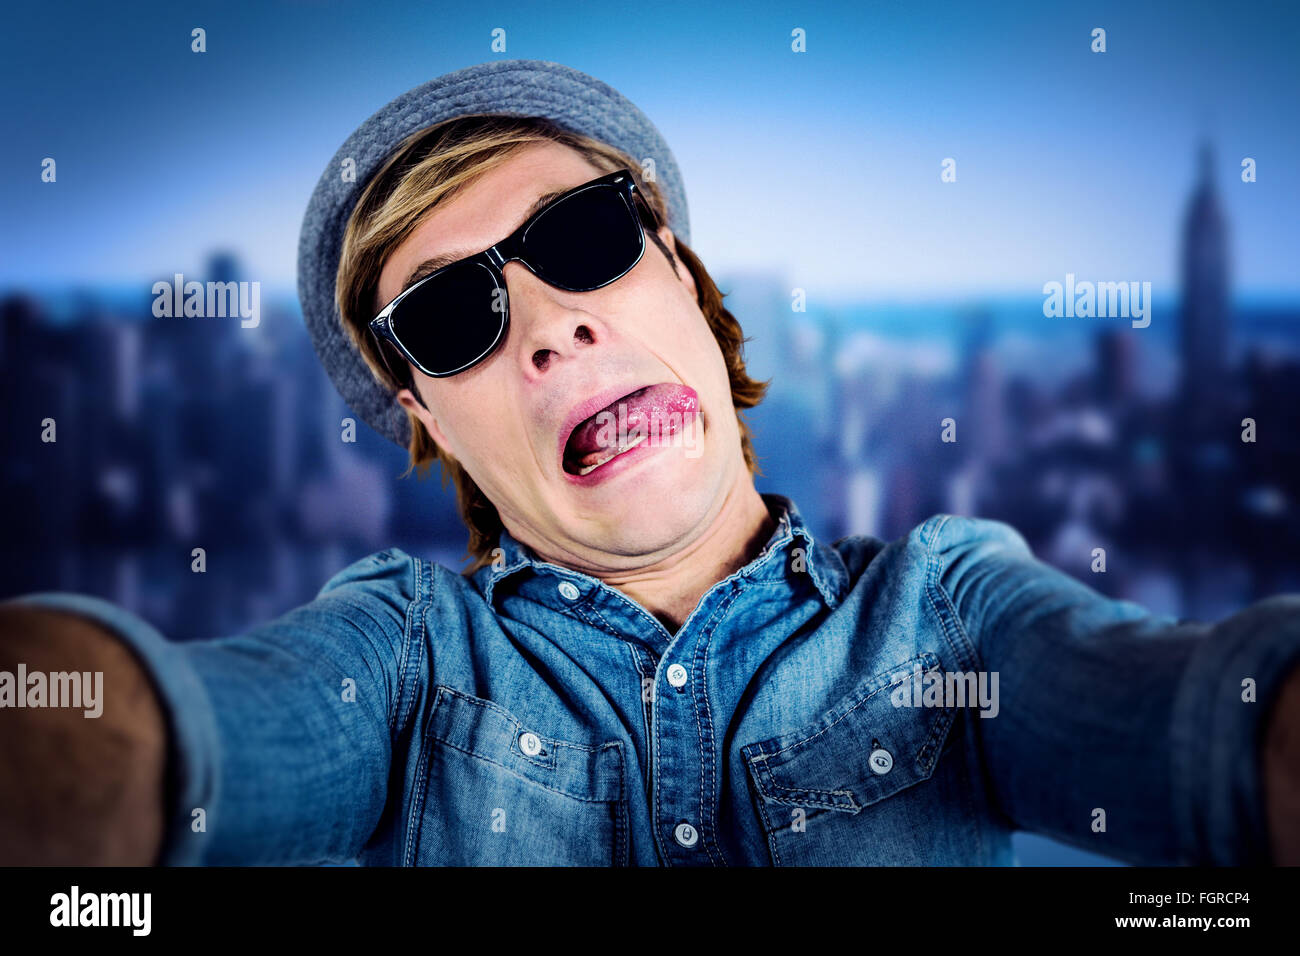 Composite image of crazy hipster wearing sunglasses Stock Photo